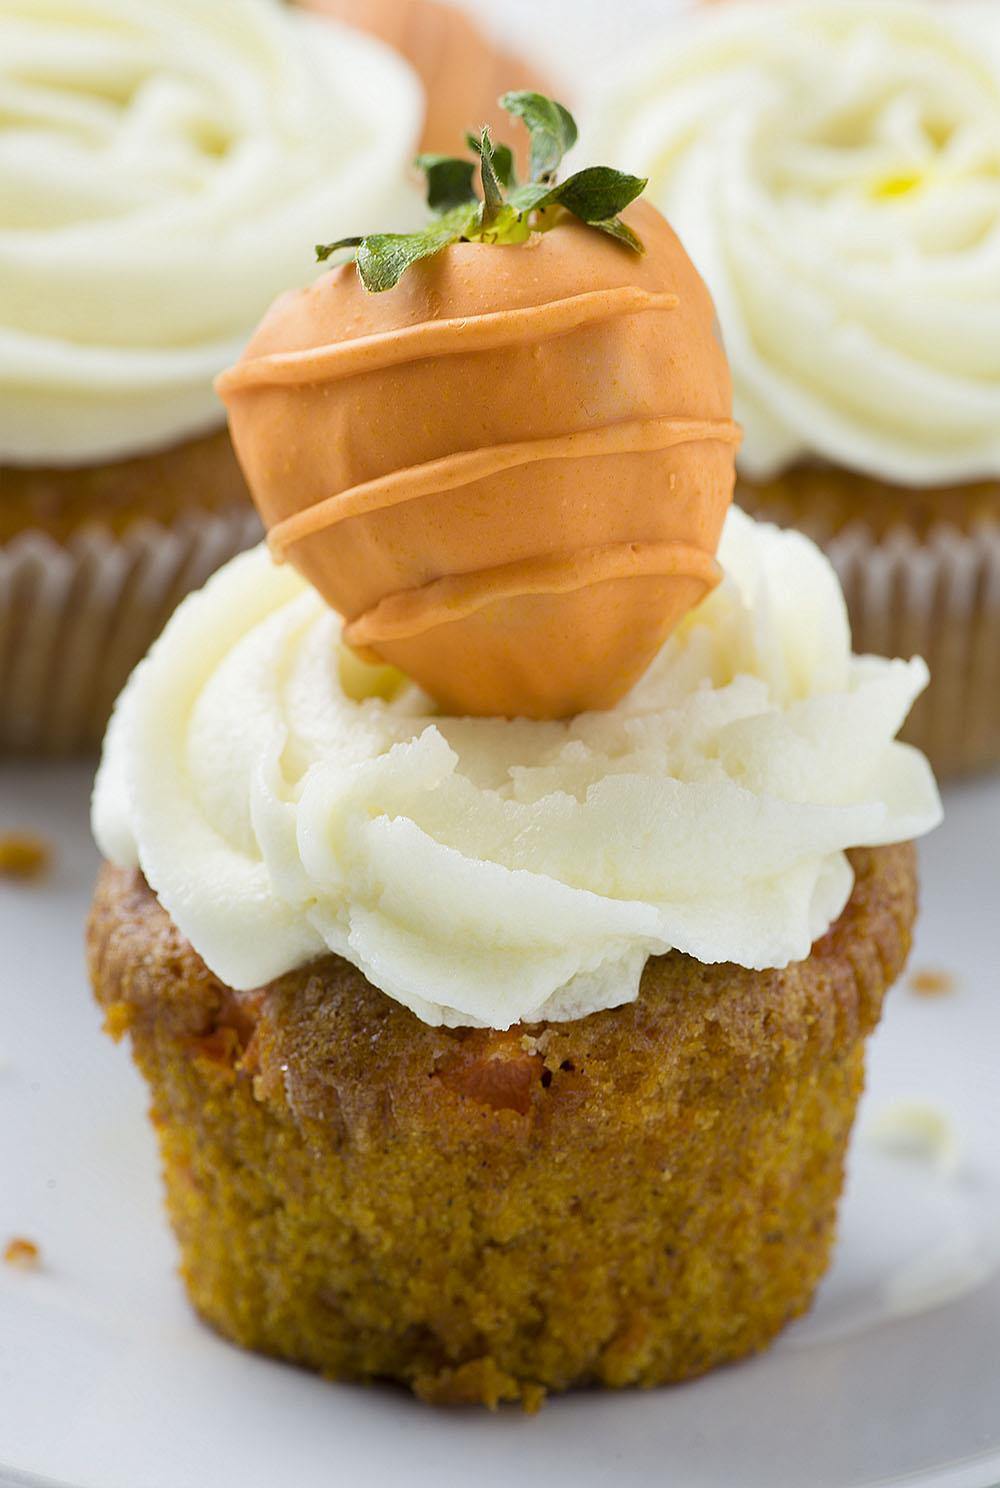 Carrot Cake Cupcakes - absolutely perfect Easter dessert. Easy to make and super moist carrot cupcakes garnished with cute Carrot Chocolate